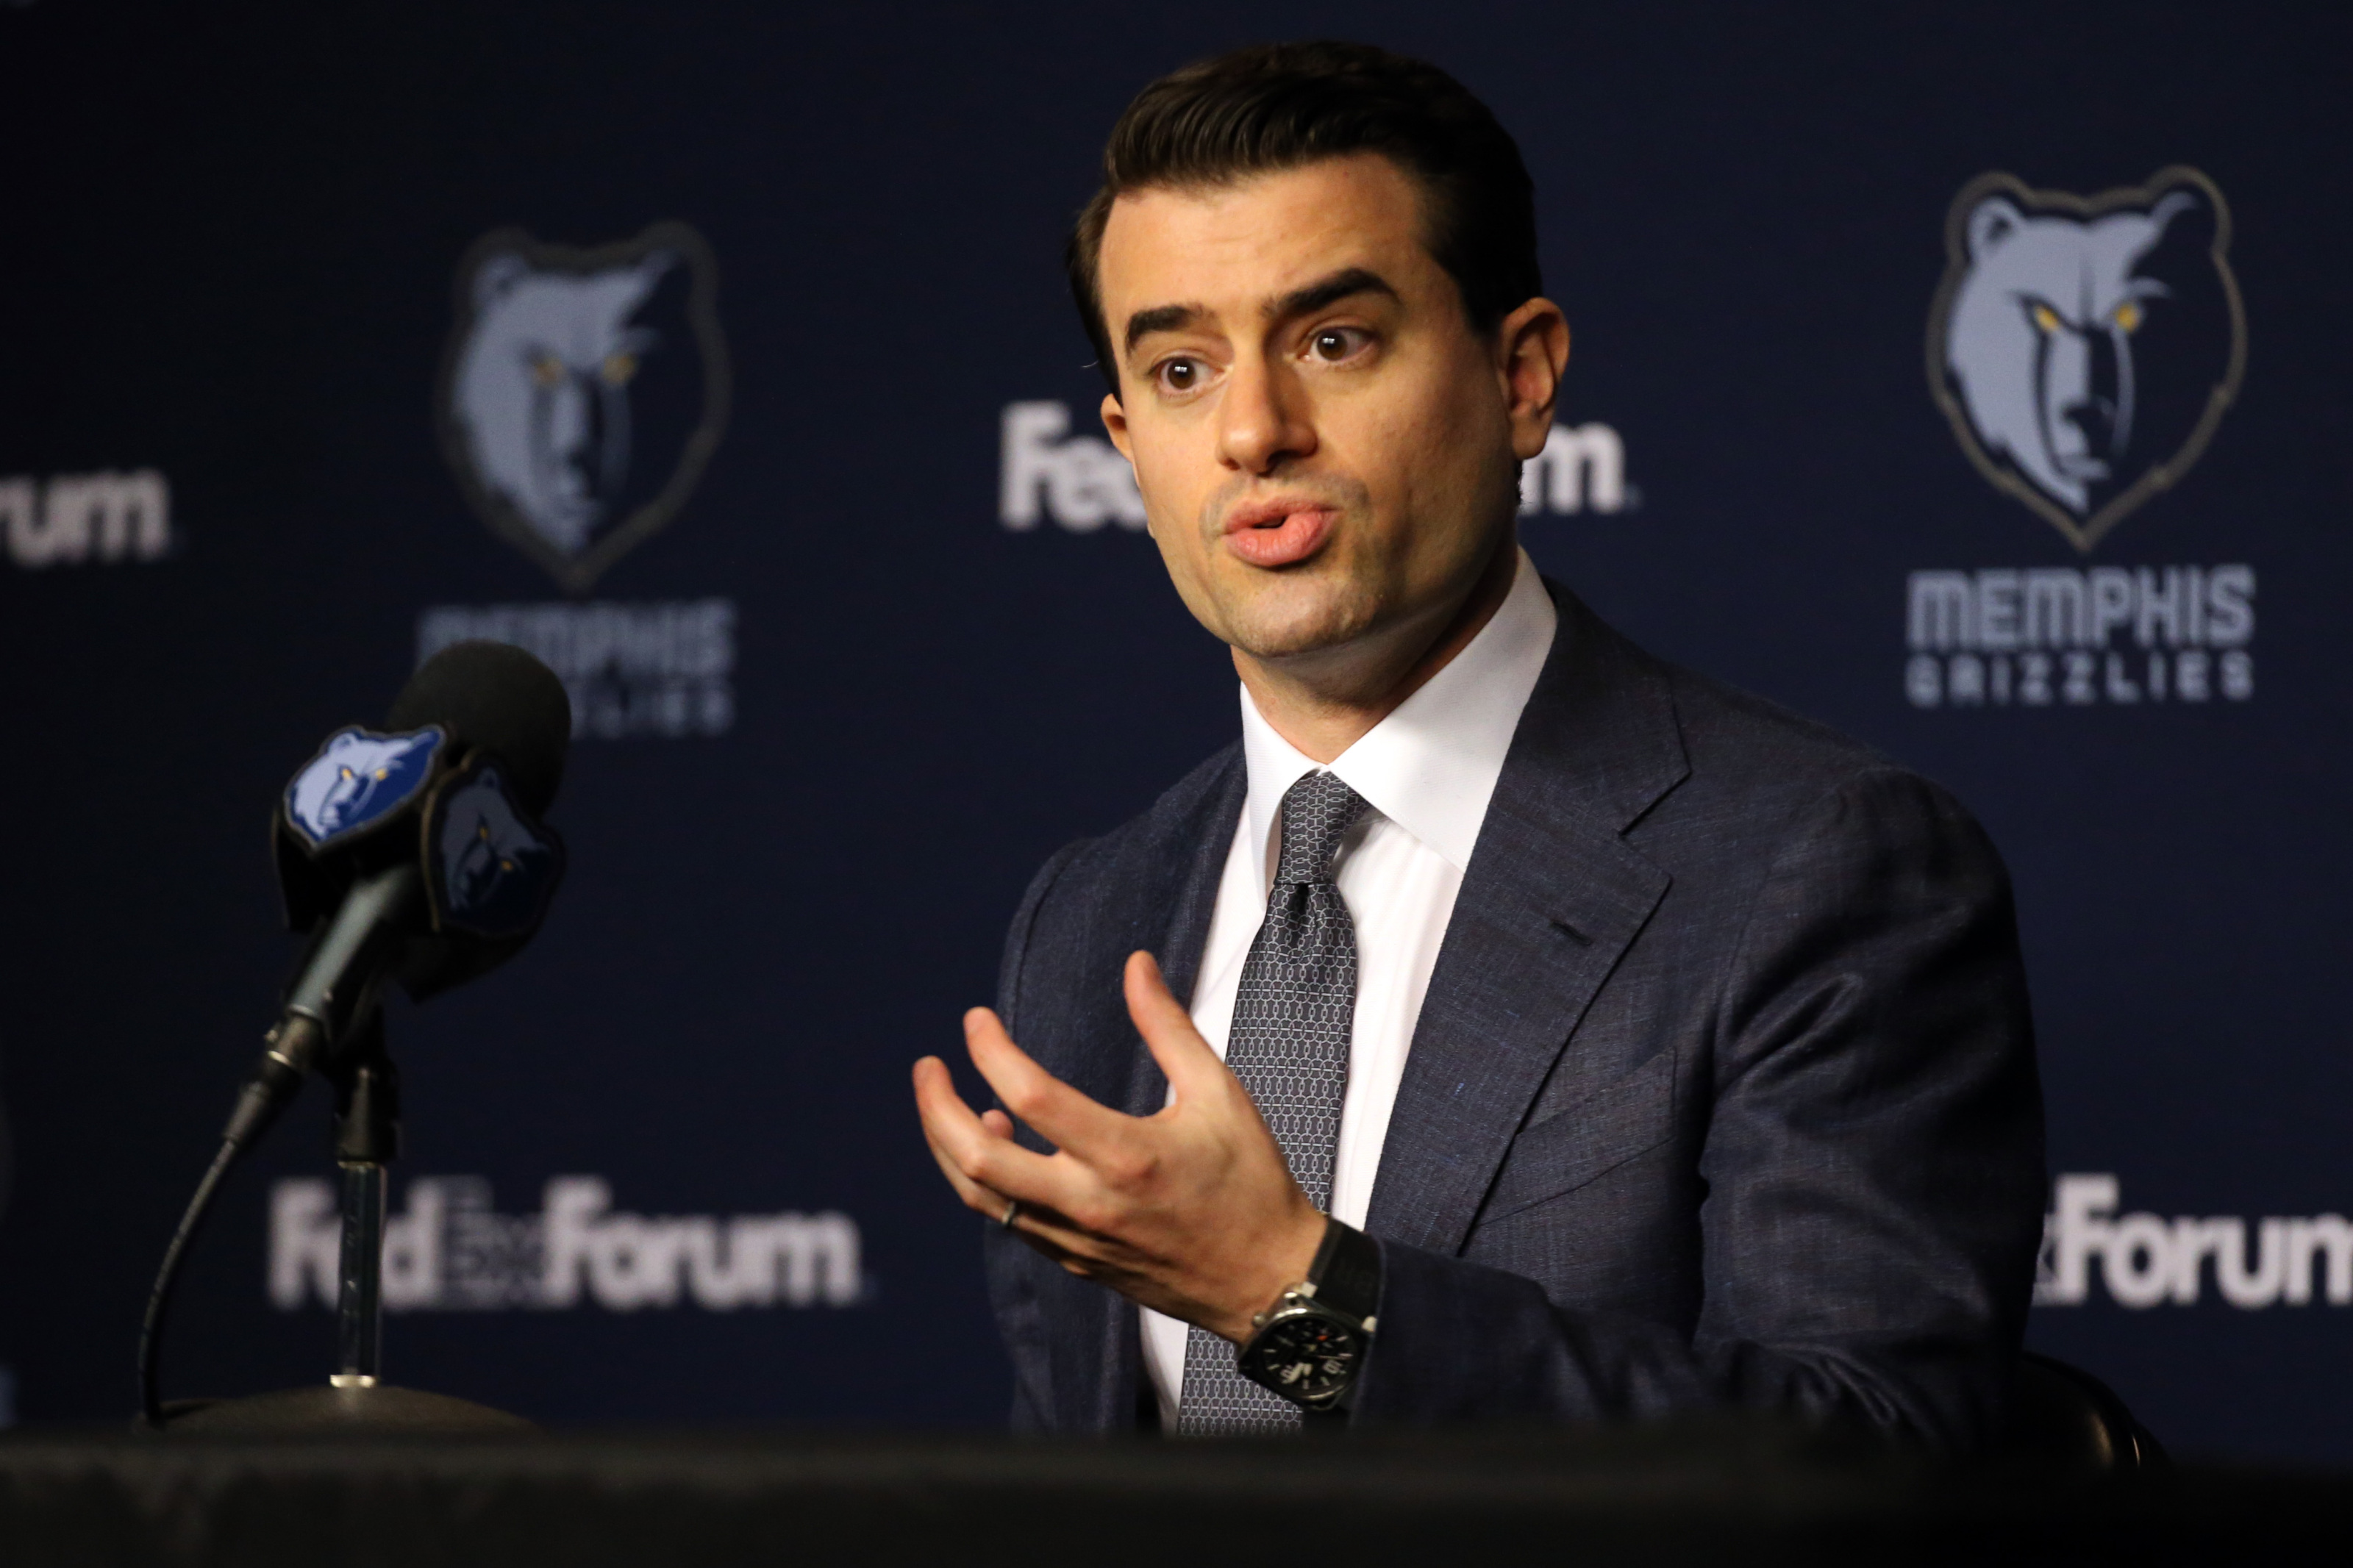 Memphis Grizzlies: 3 reasons to stand pat at 2019 NBA Trade Deadline